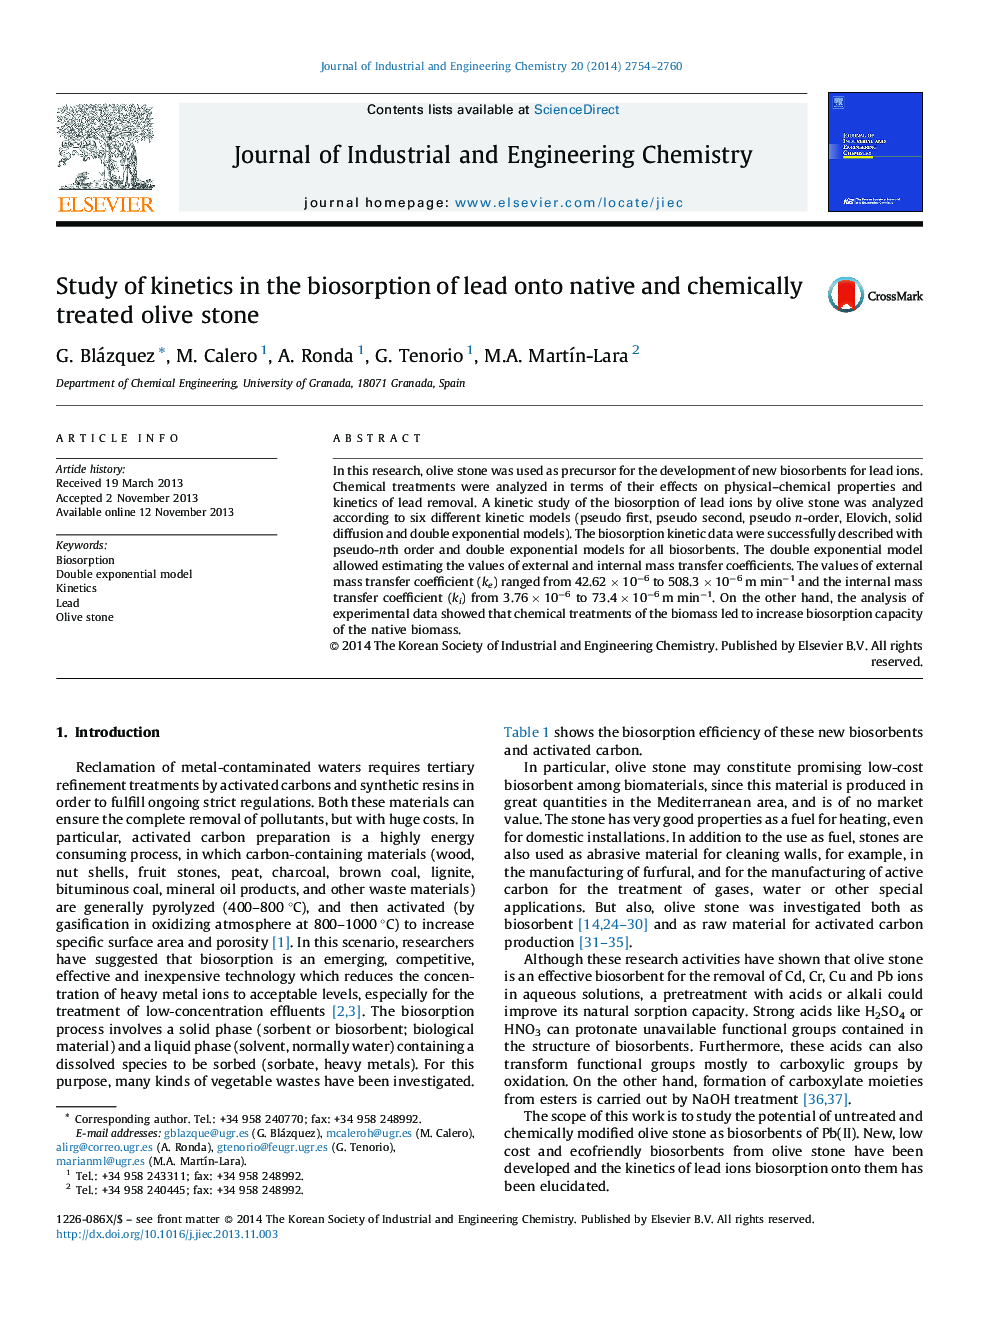 Study of kinetics in the biosorption of lead onto native and chemically treated olive stone